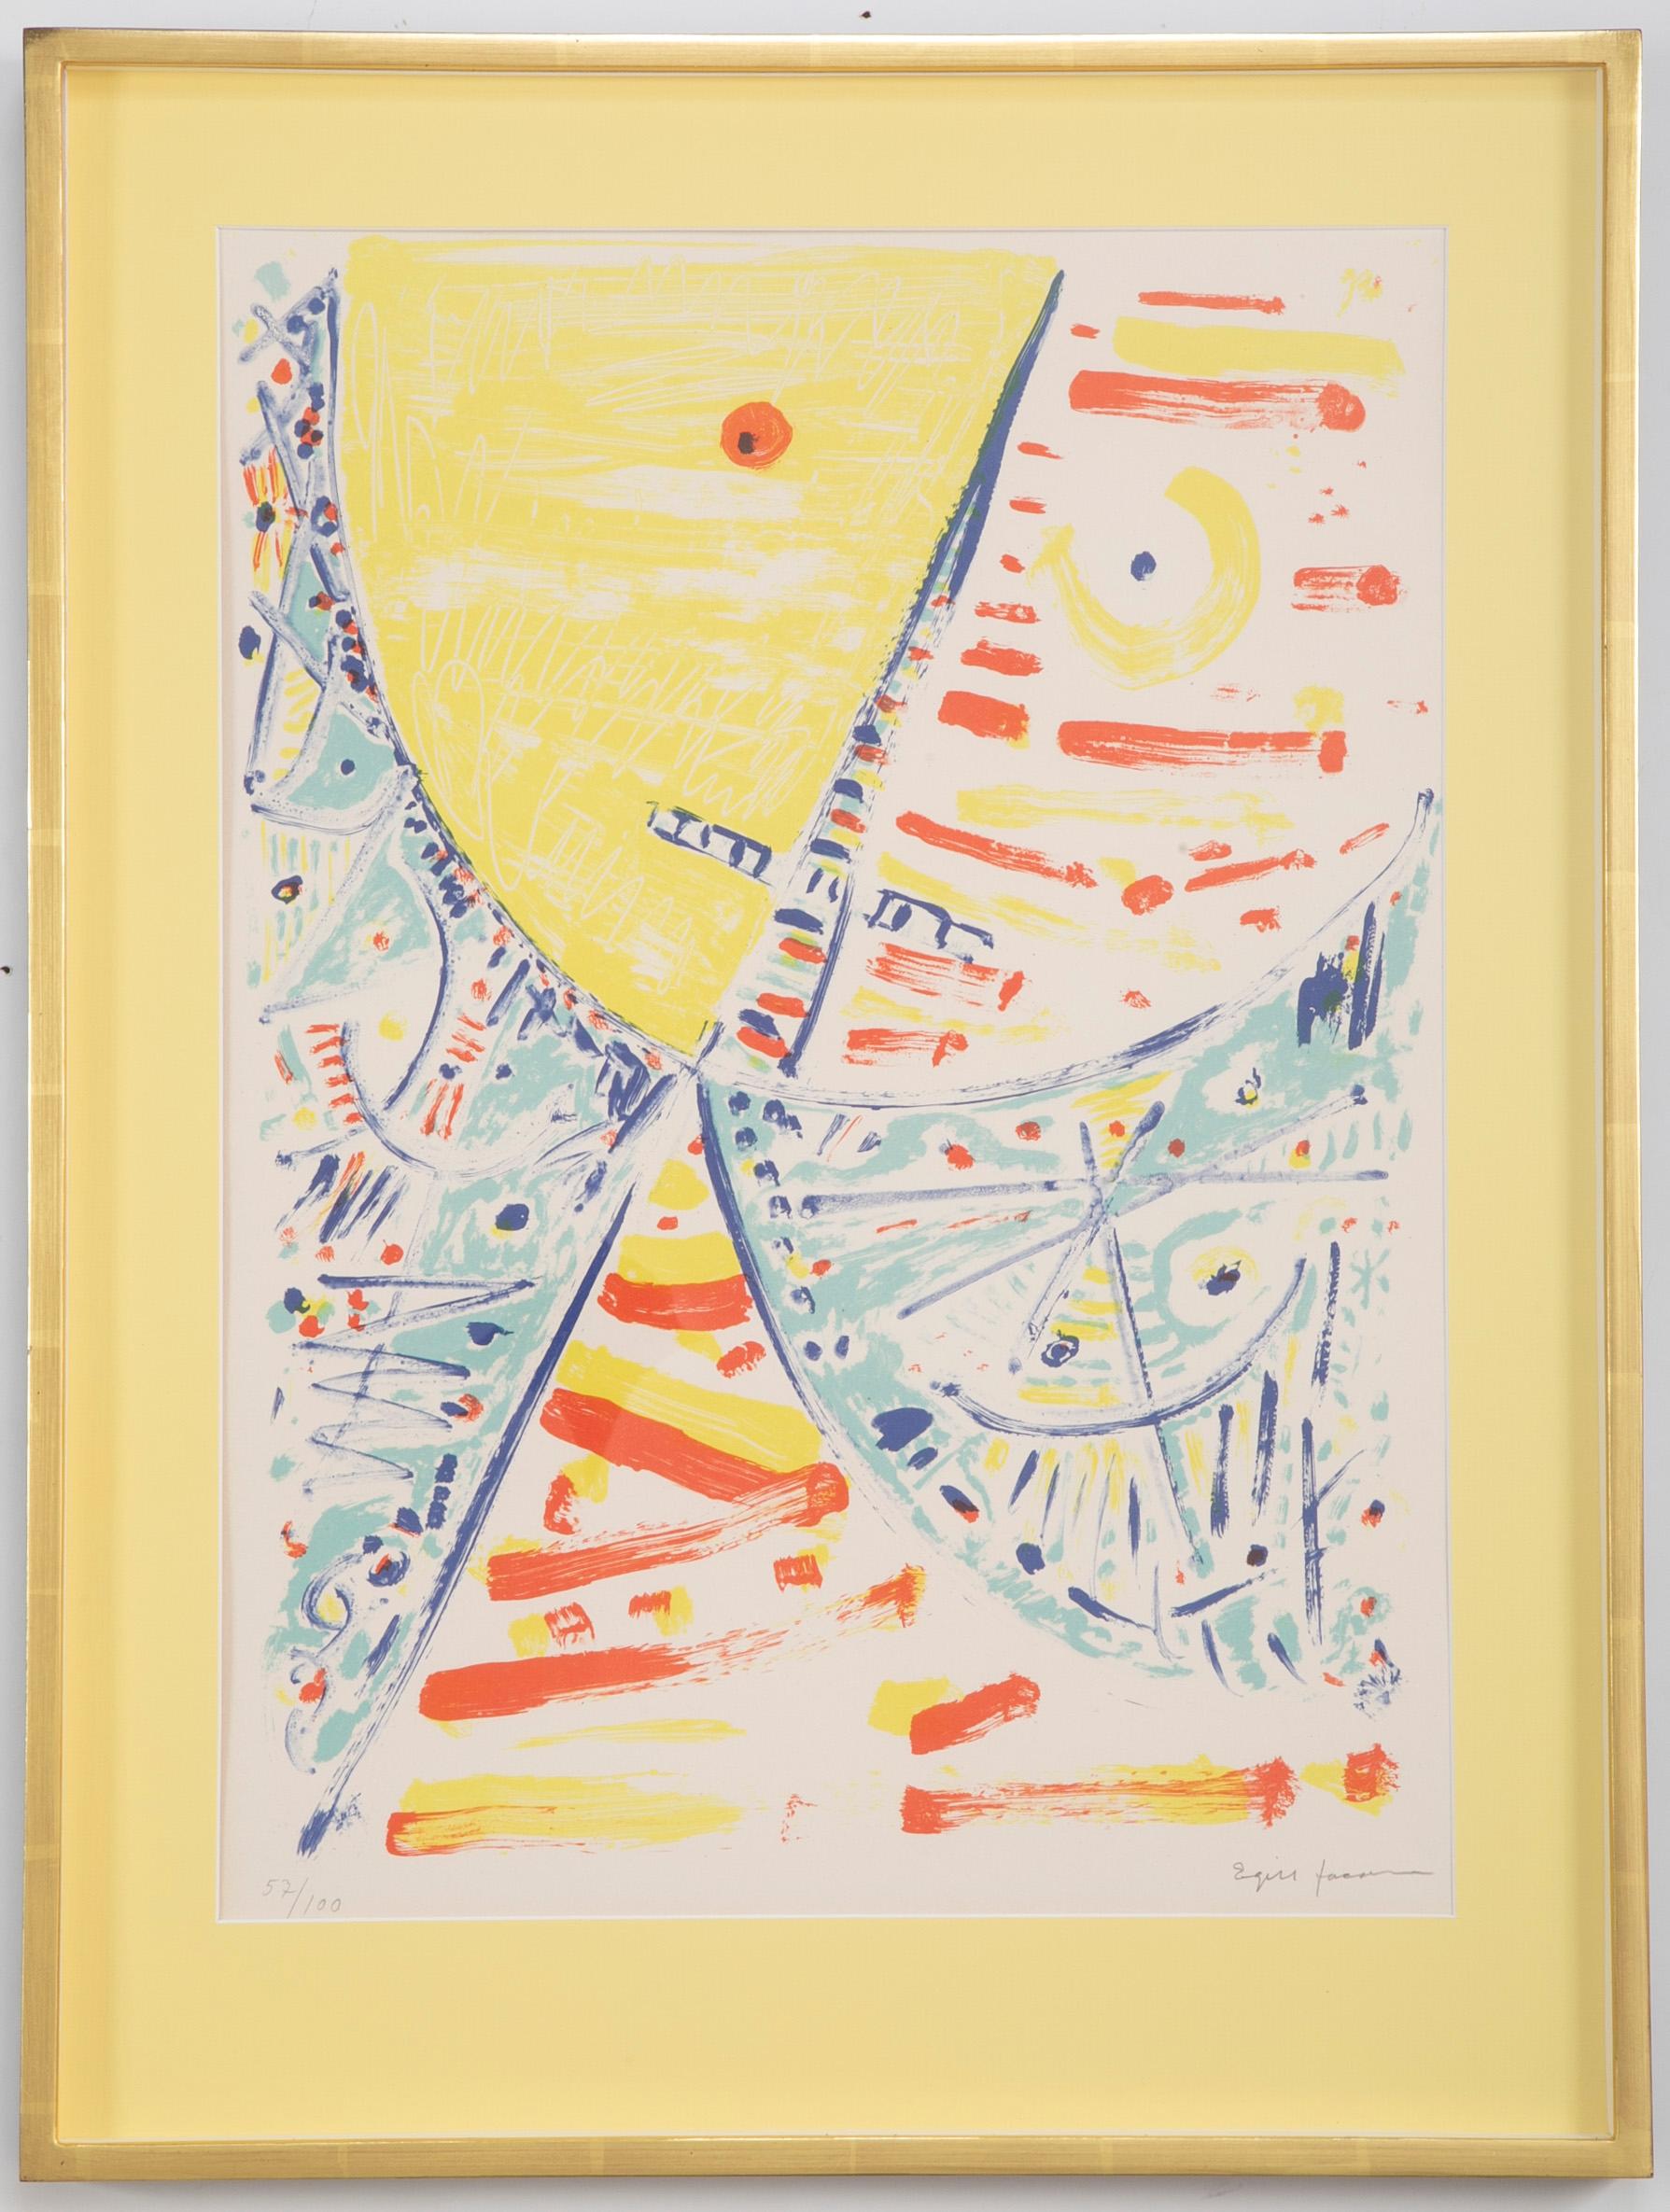 Lithograph in Colors Composition 57/100 by Egill Jacobsen ( Danish. 1918 - 1998 ). Signed lower right. Framed using acid free materials, UV protective plexiglass in 22 karat yellow gold leaf frames. 

Sight ; 20.88